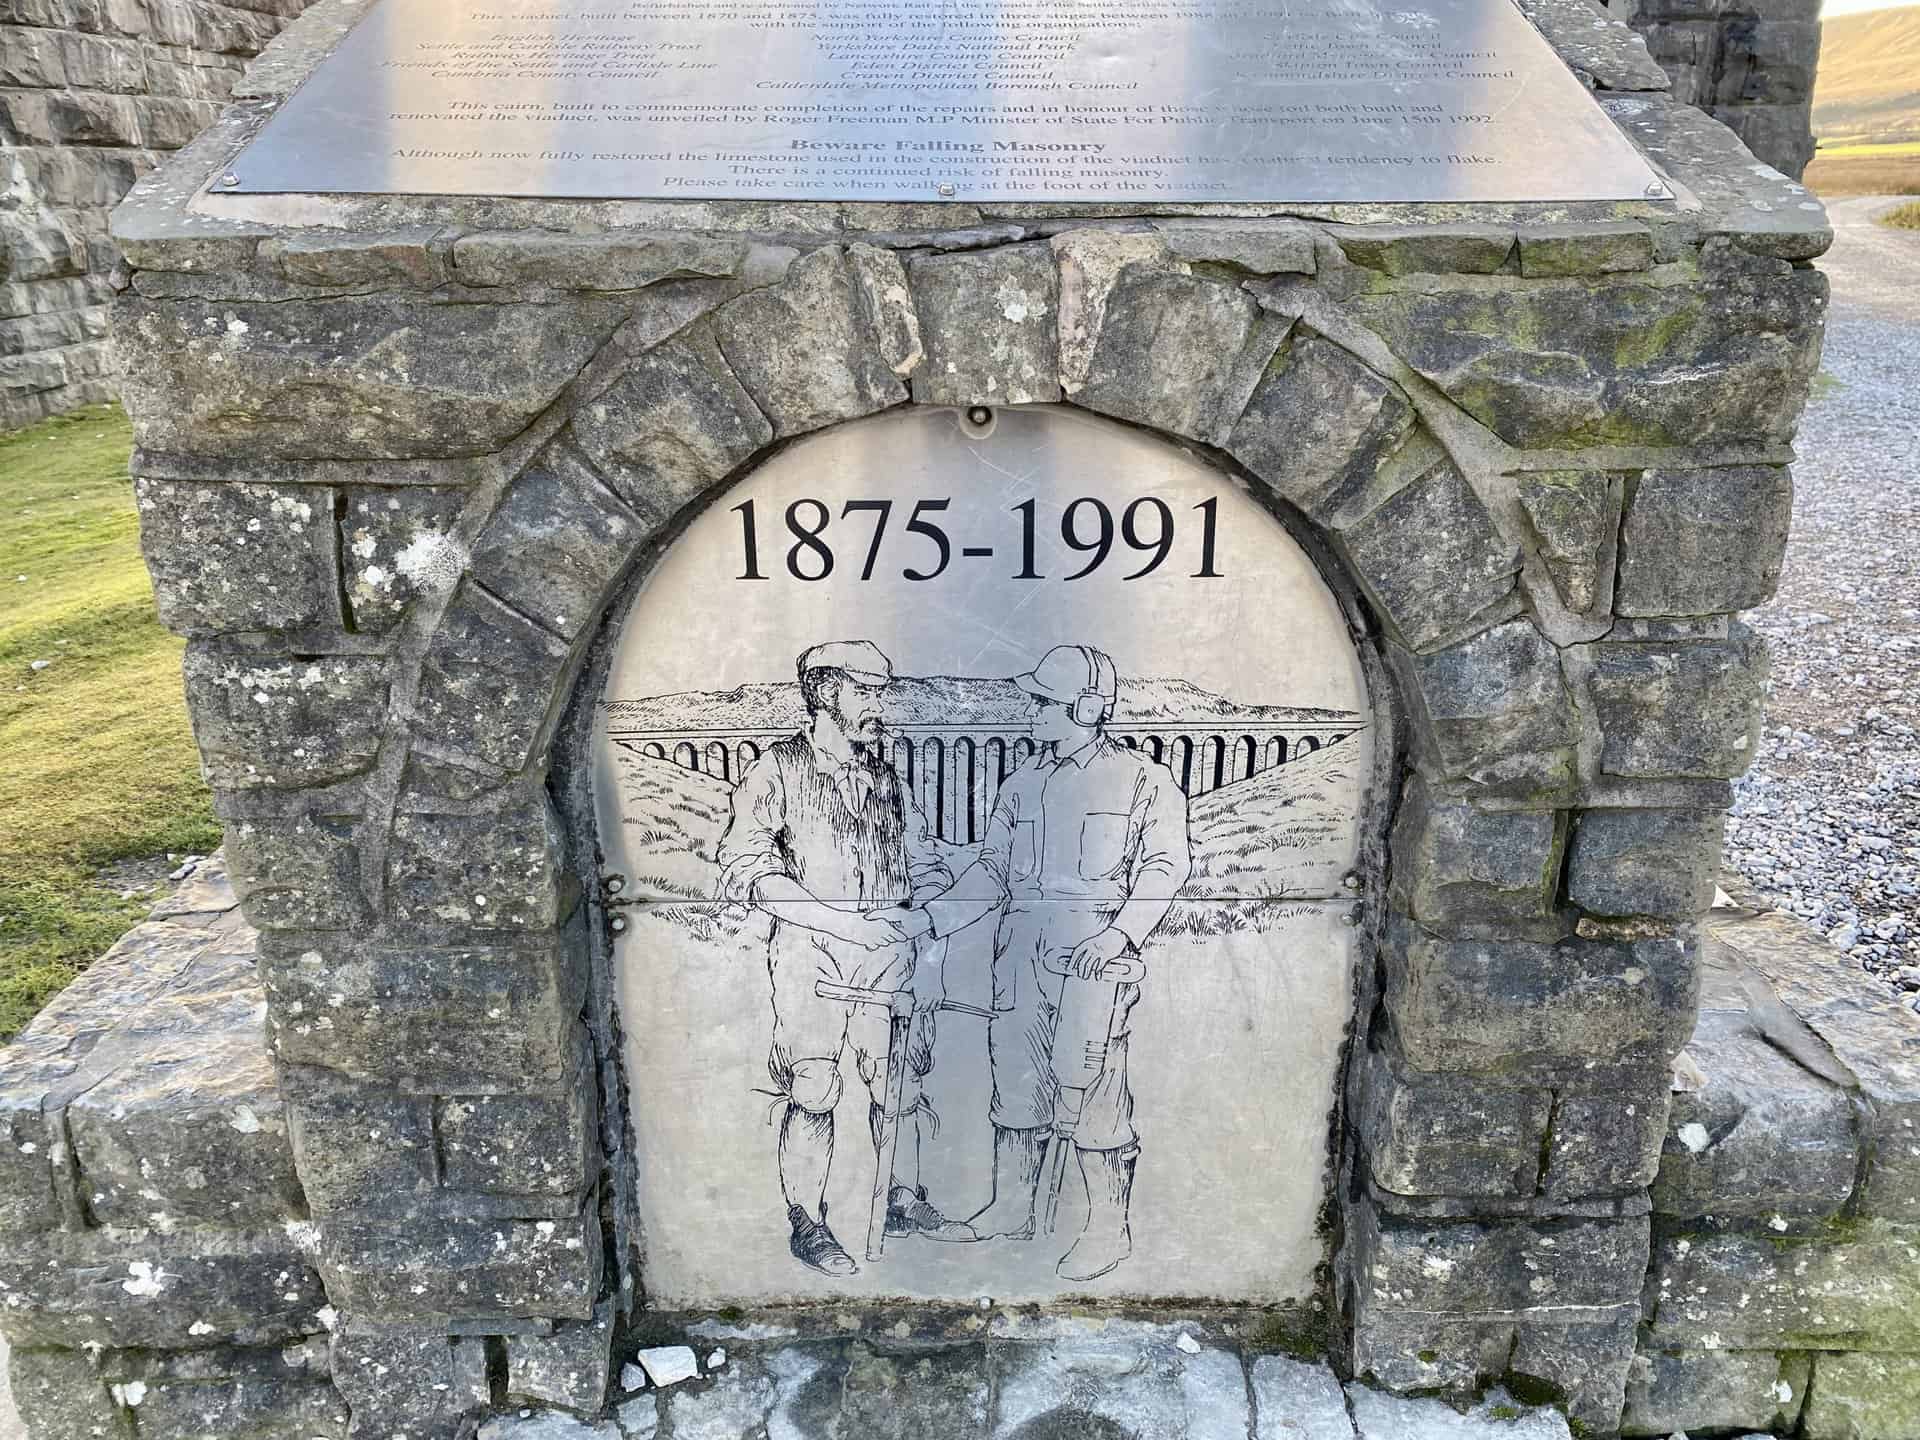 The silver plaque attached to one side of the stone statue near the foot of the viaduct.